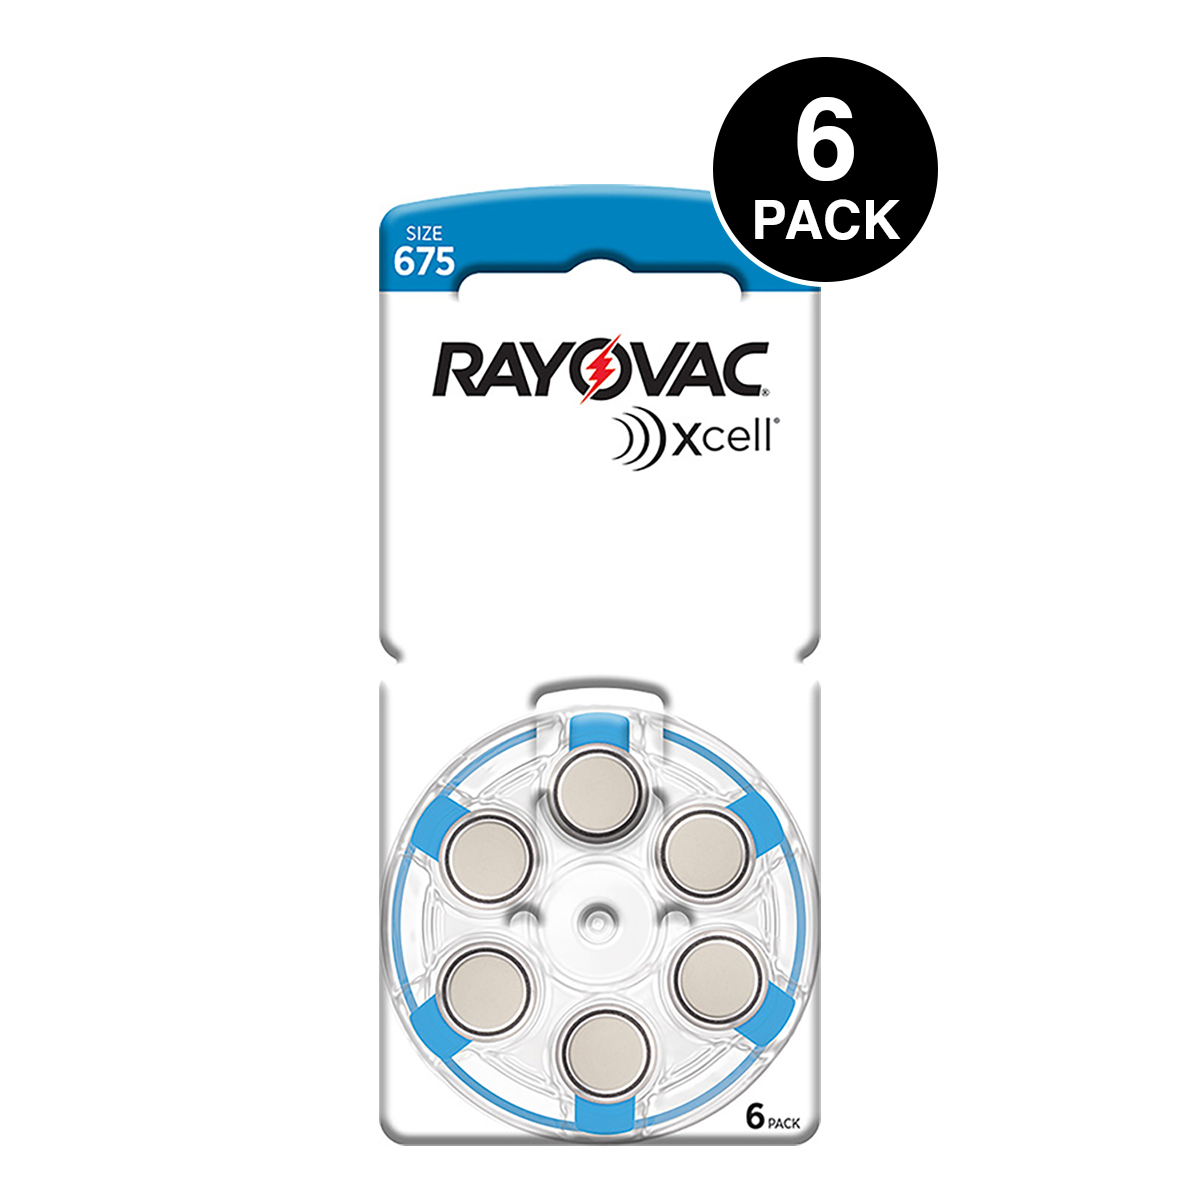 Xcell (Made By Rayovac) Size 675 Hearing Aid Batteries (6 pcs)